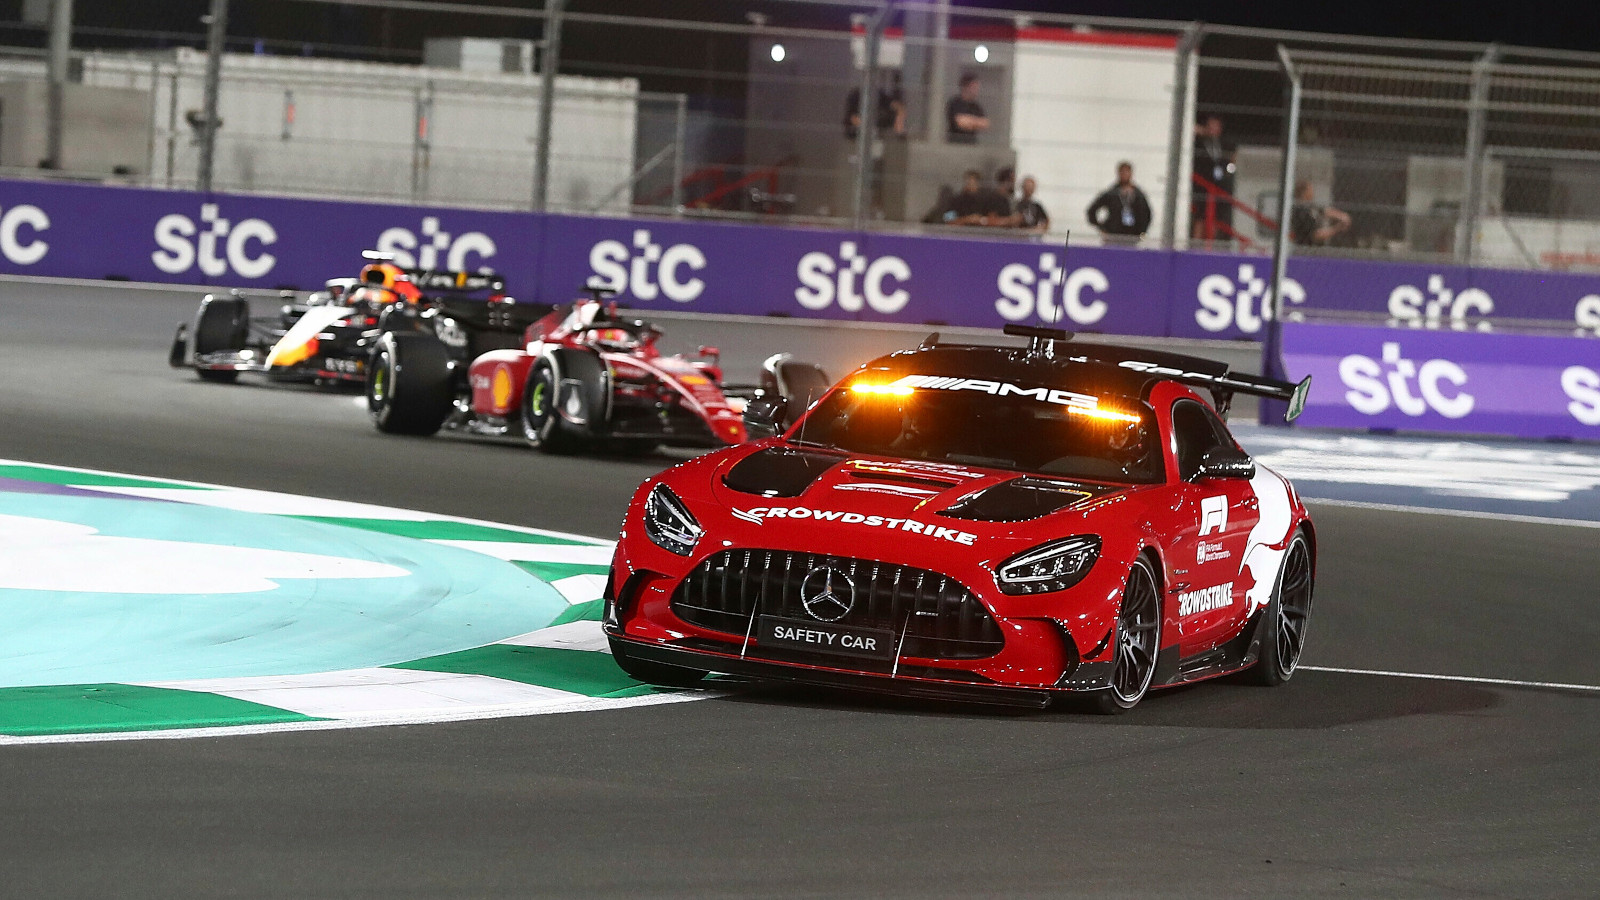 Charles Leclerc and Max Verstappen behind the Safety Car. Saudi Arabia March 2022